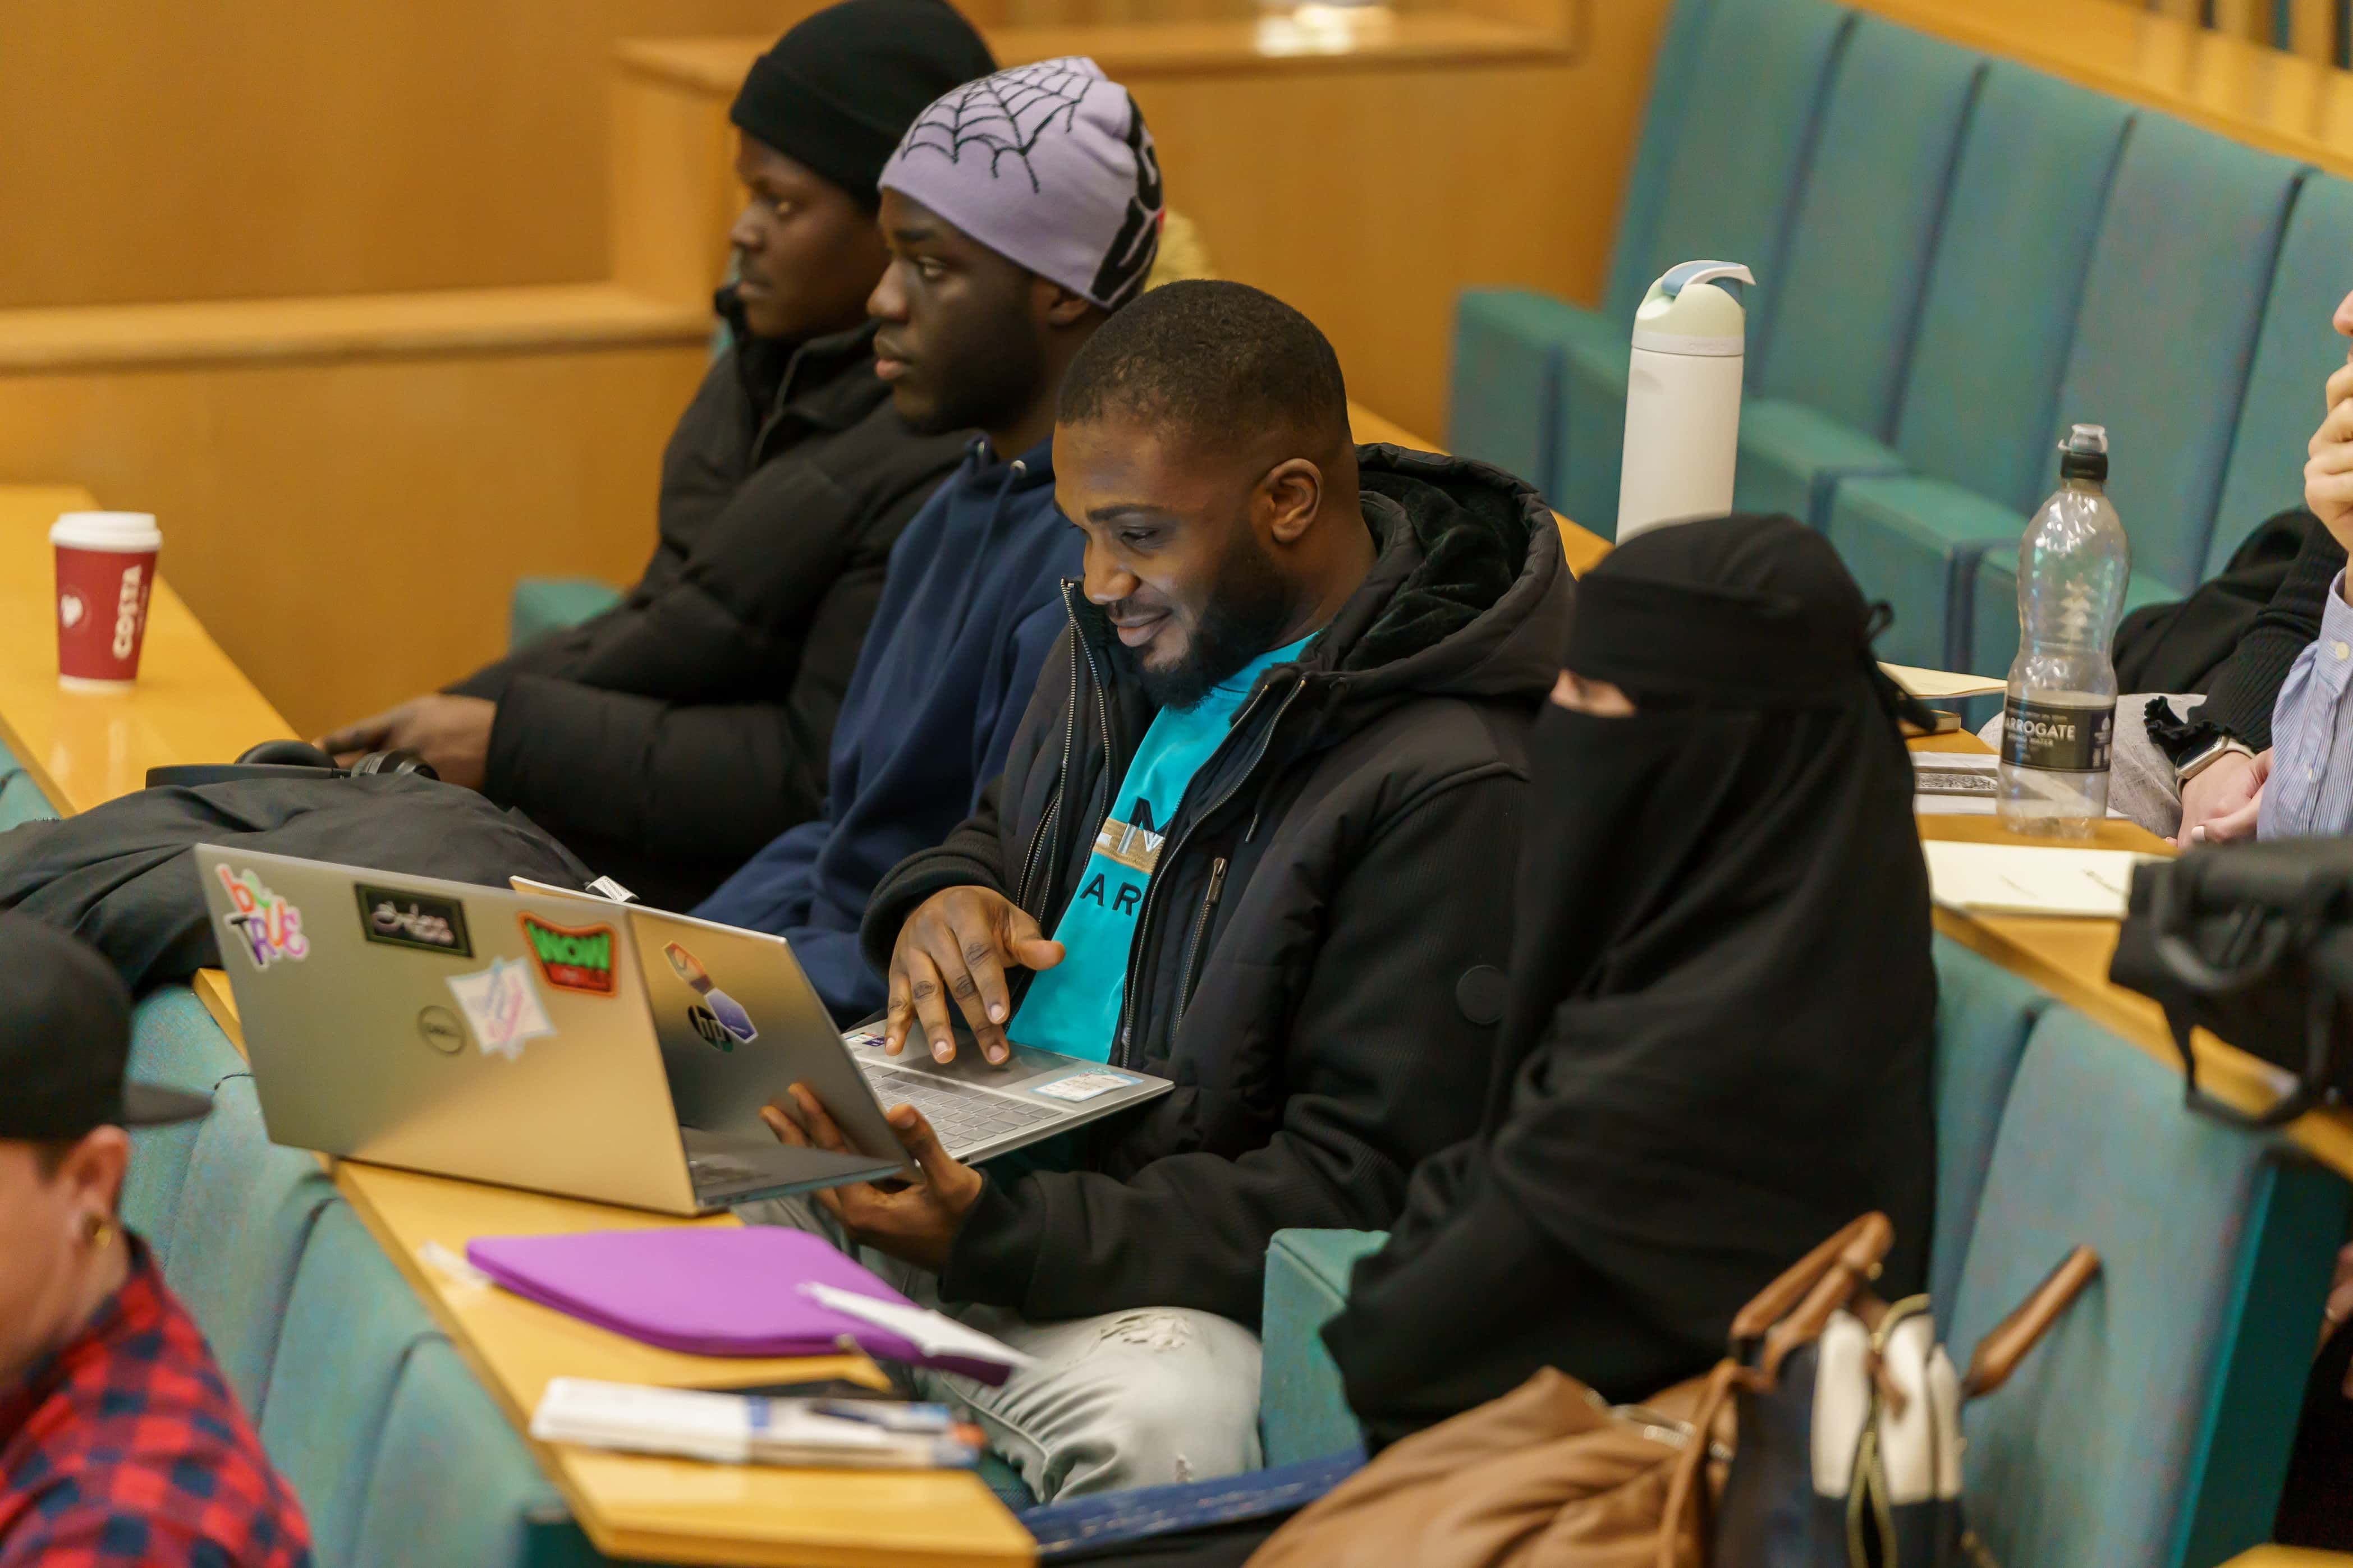 A group of computer science students sitting together in a lecture theatre, working on the Hackthon on their laptops